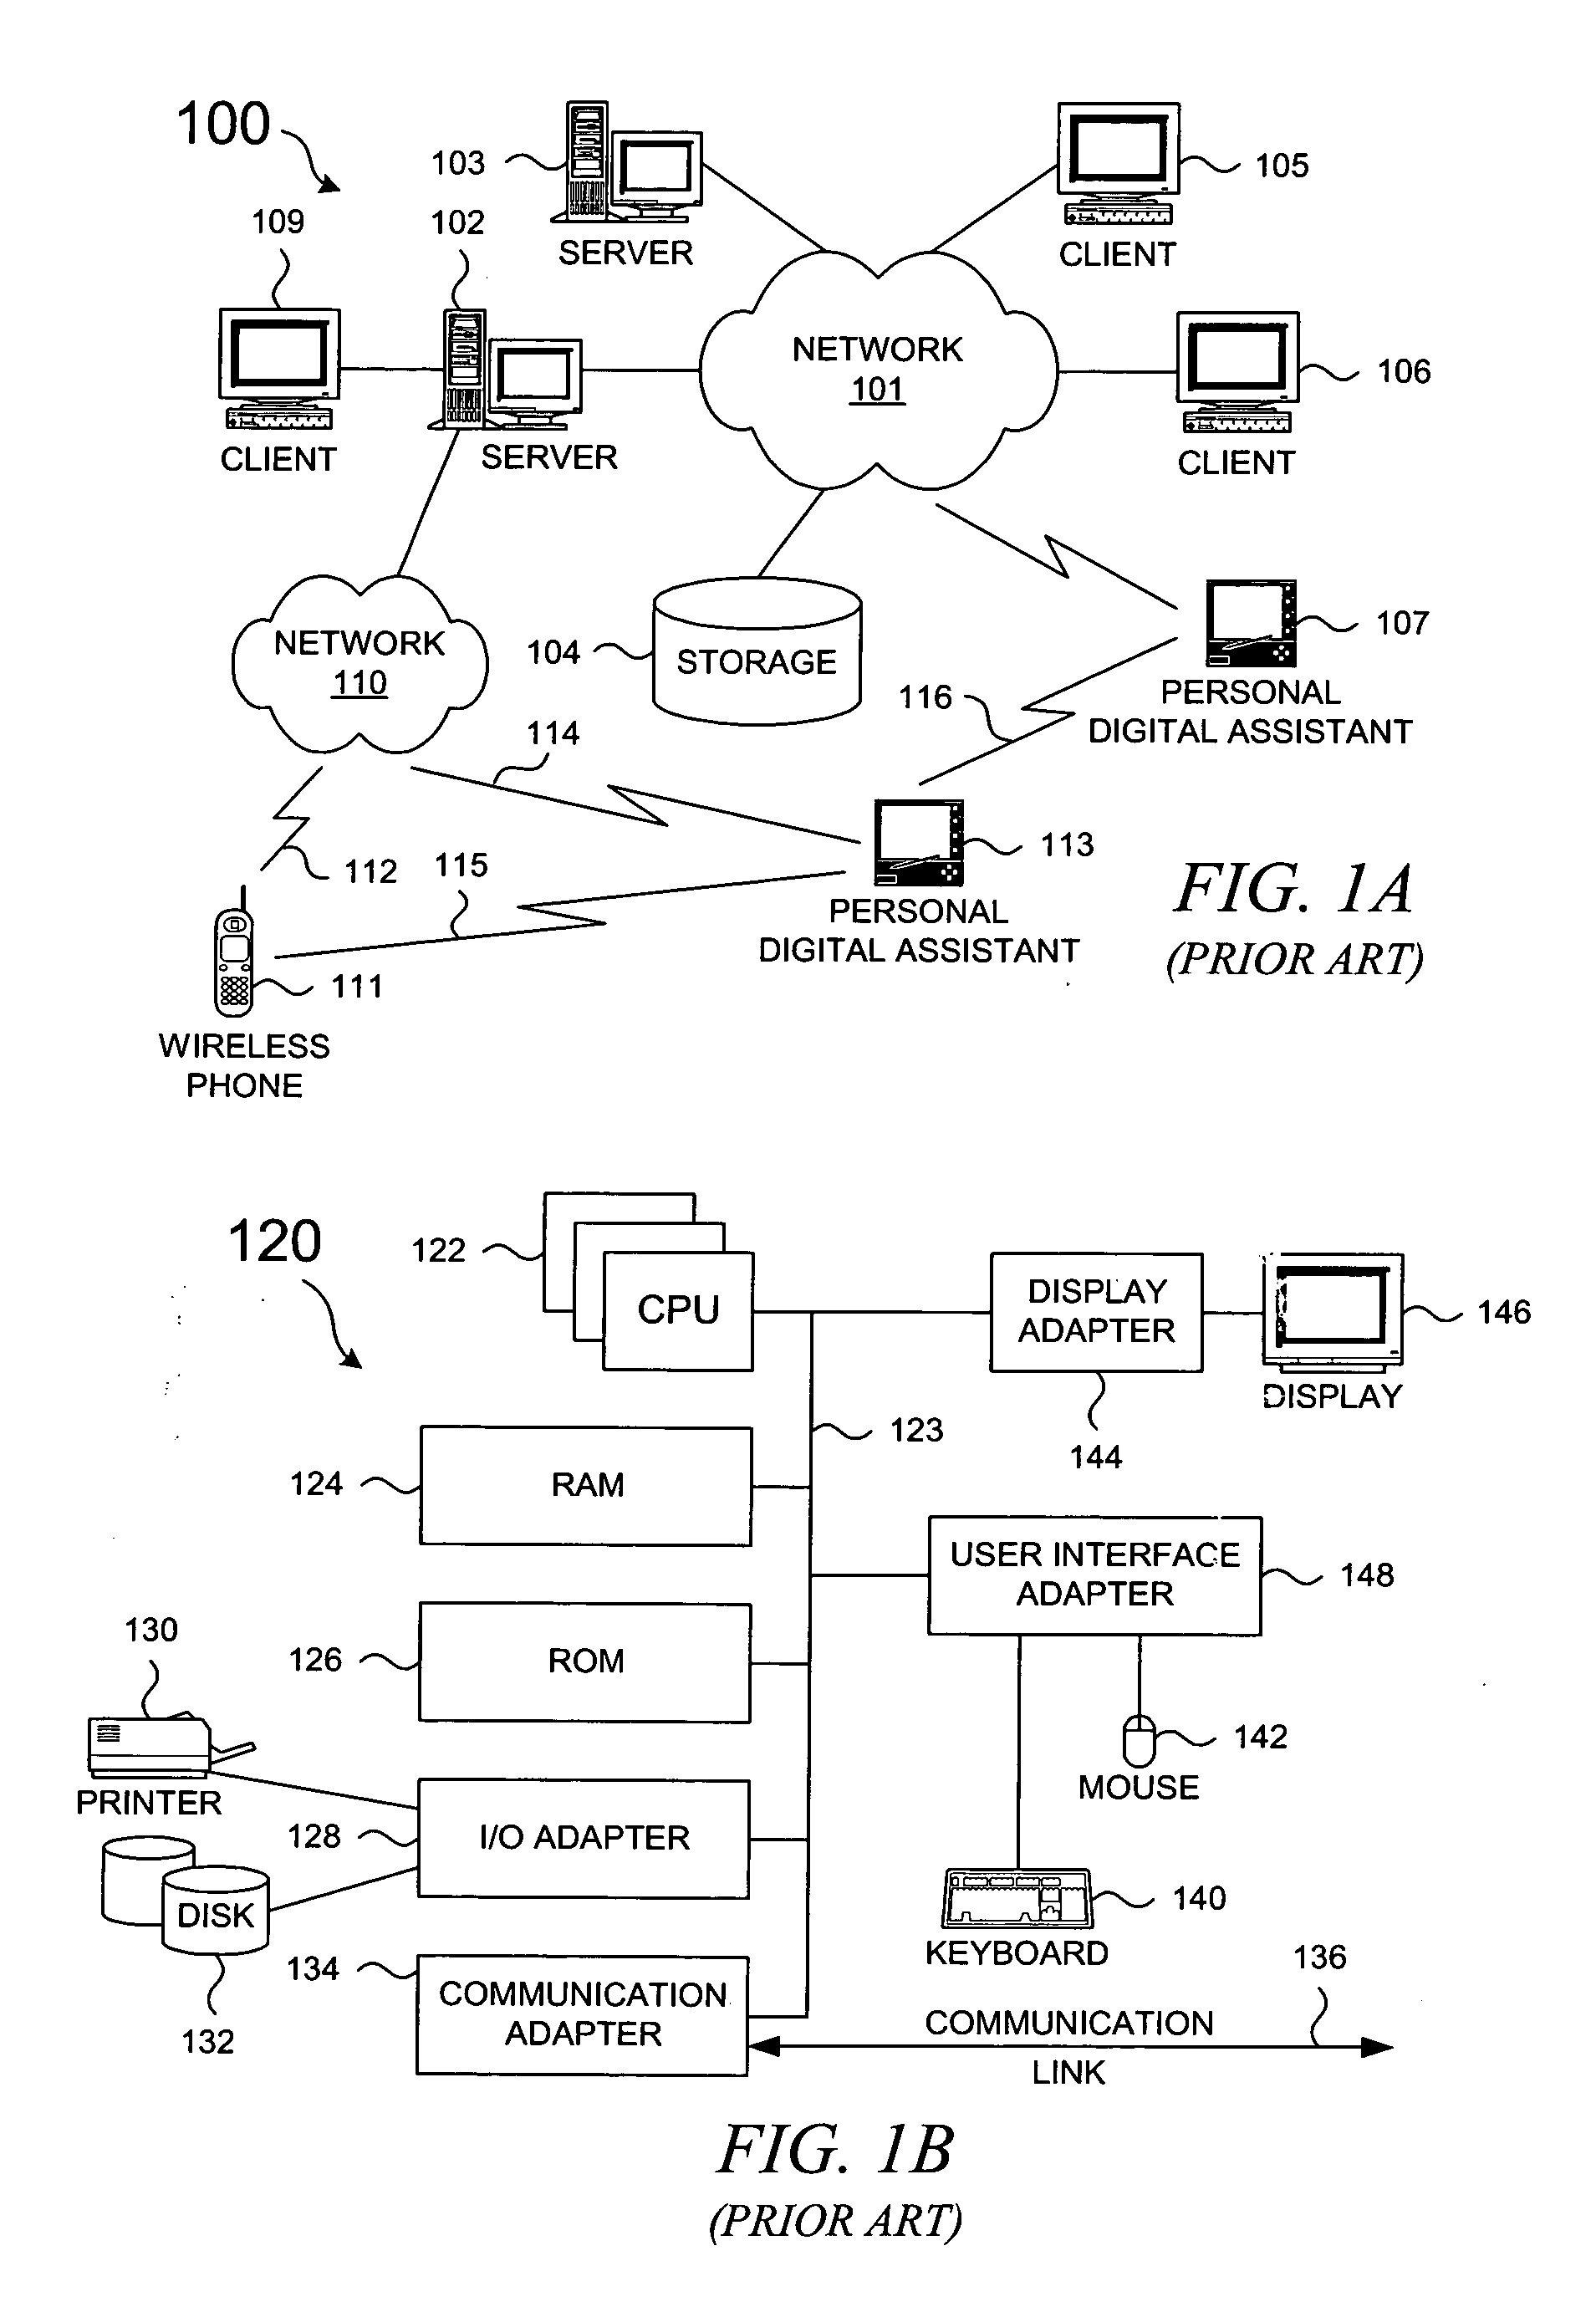 Method and system for establishing federation relationships through imported configuration files